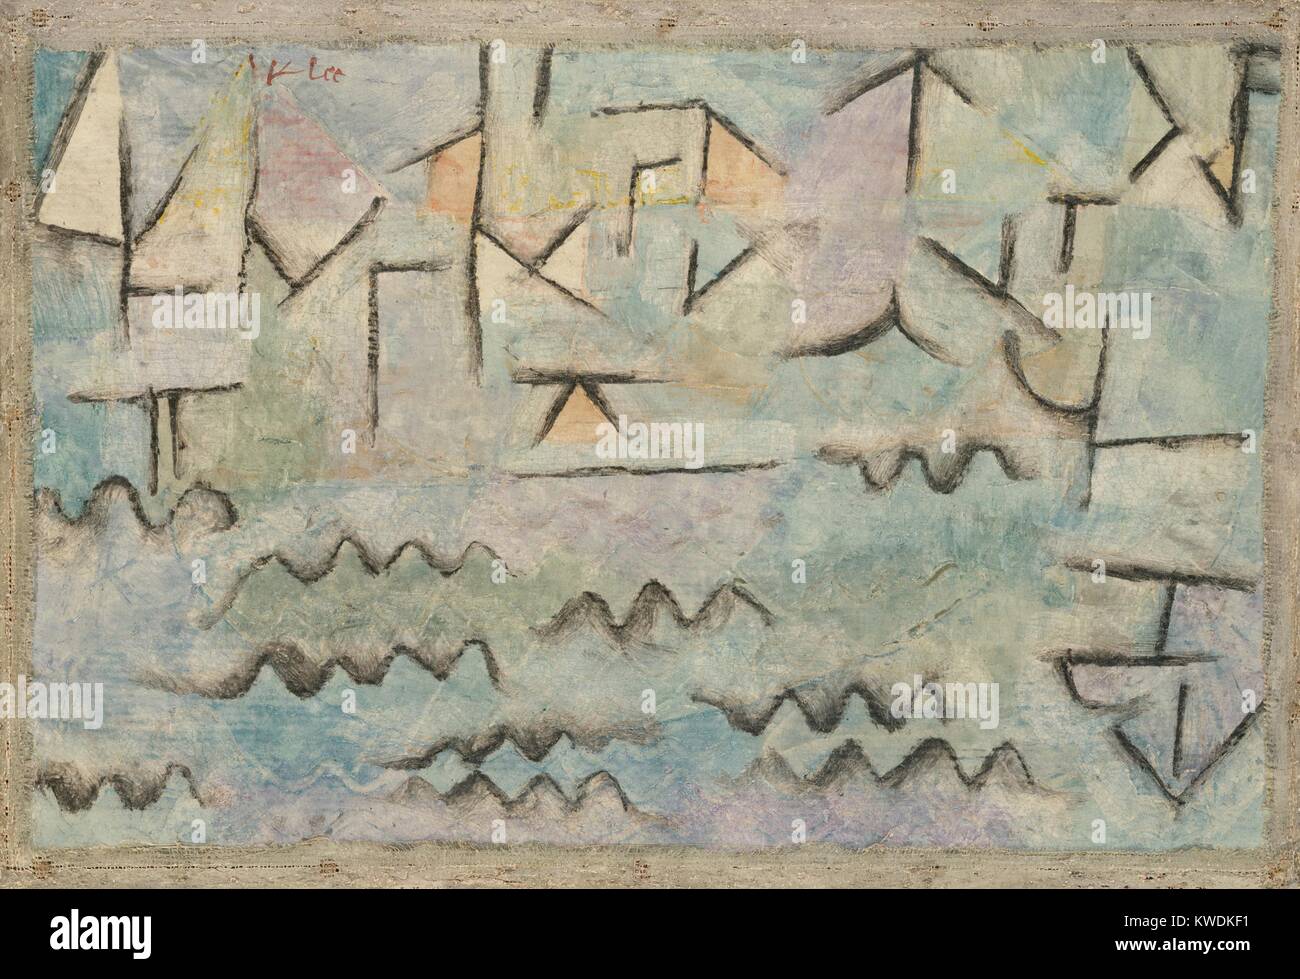 THE RHINE AT DUISBURG, by Paul Klee, 1937, Swiss painting, oil and charcoal on cardboard. Abstract cityscape with river, painted with childlike symbols for waves on the water and the linear geometry of buildings (BSLOC 2017 7 51) Stock Photo